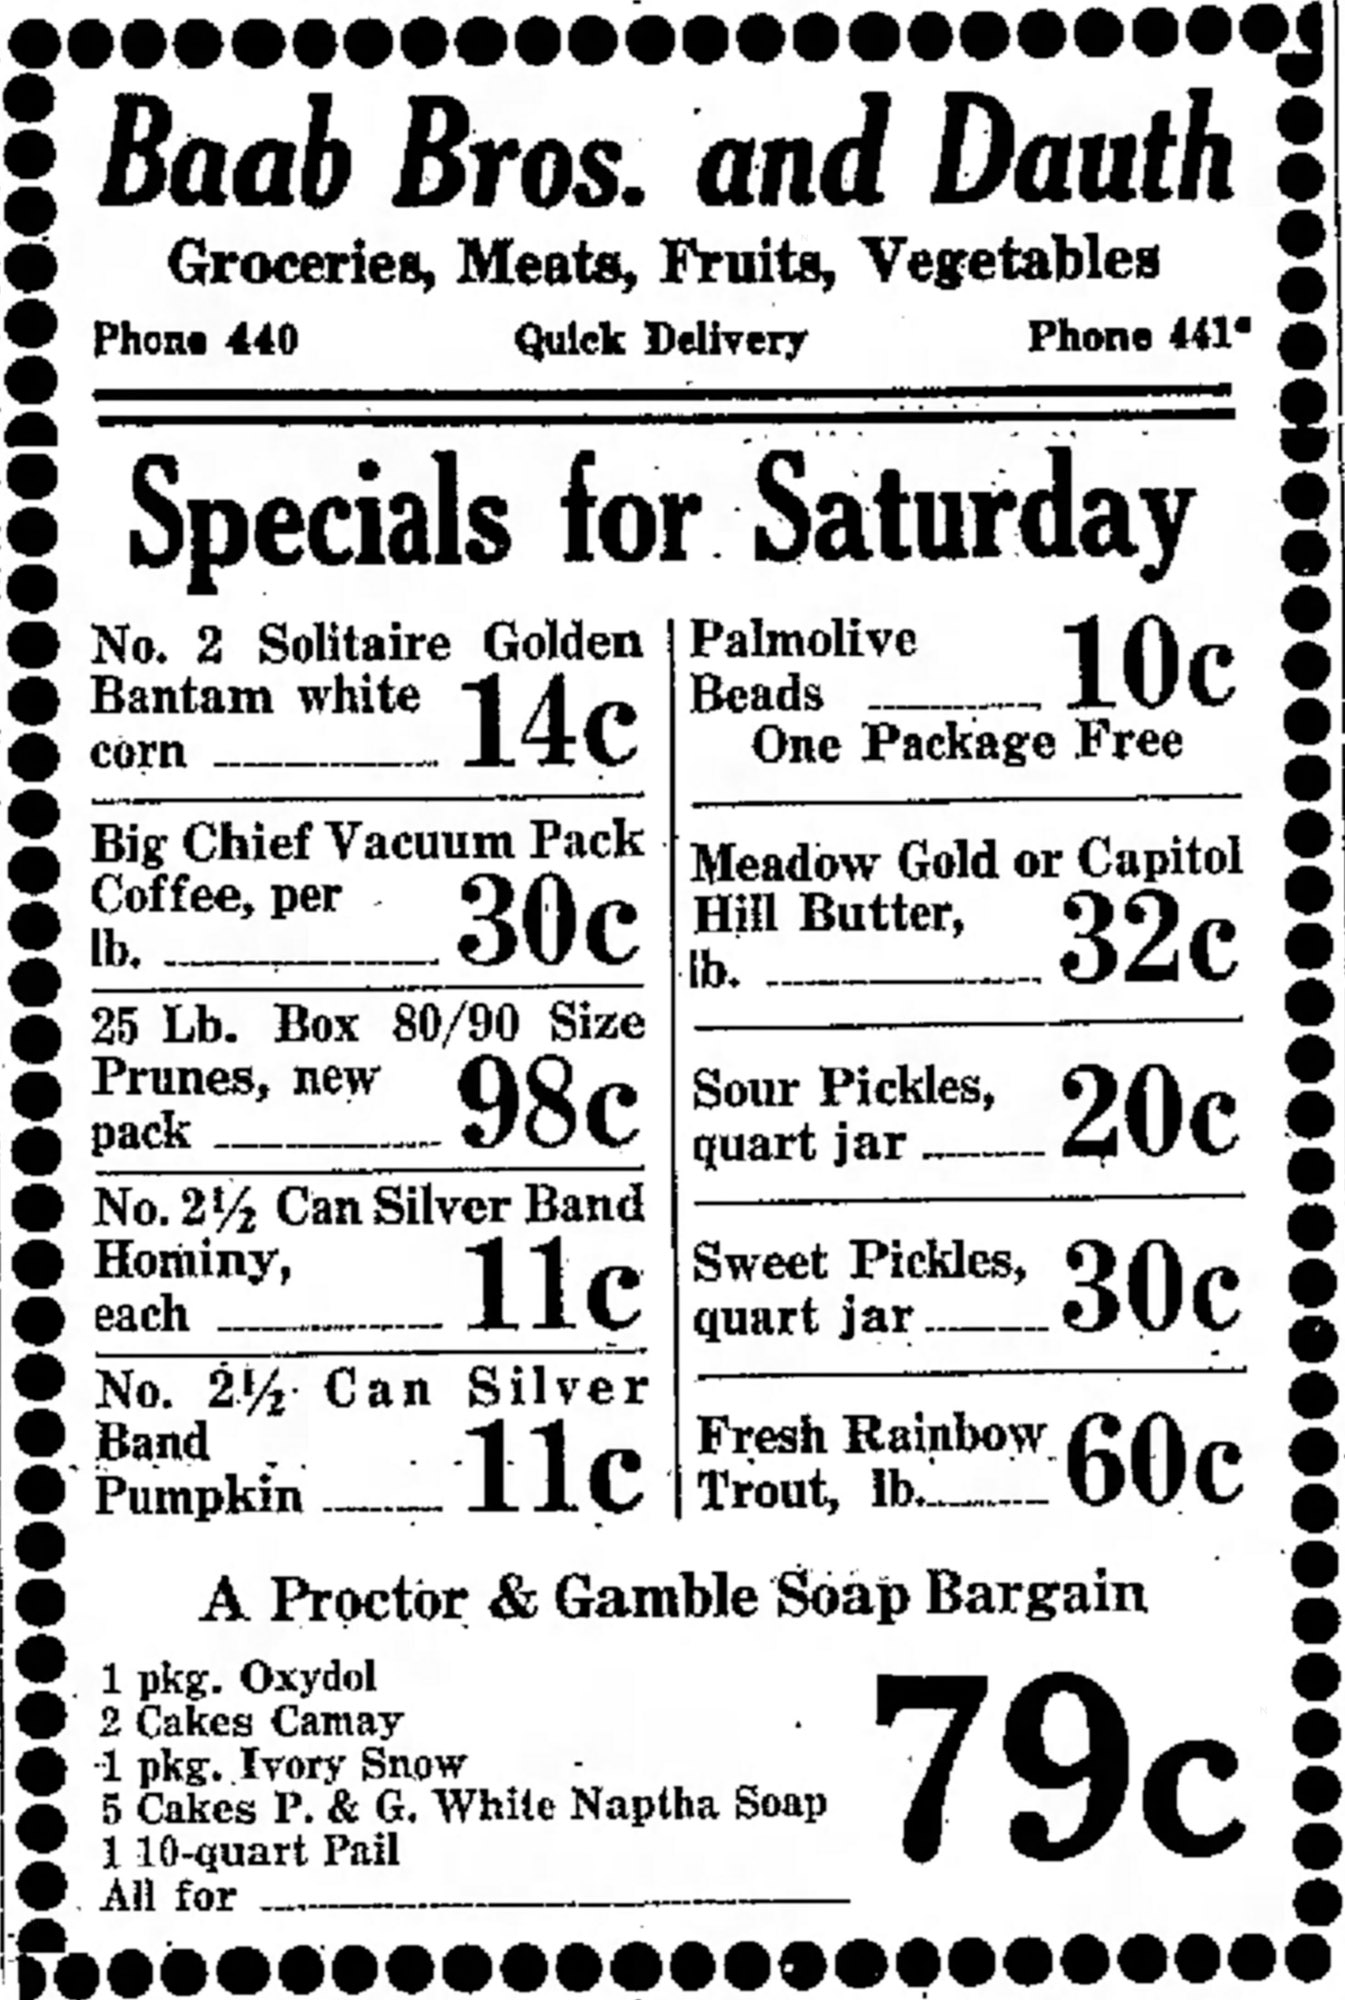 Dauth Family Archive - 1931-11-06 - Greeley Daily Tribune - Baab Bros and Dauth Advertisement